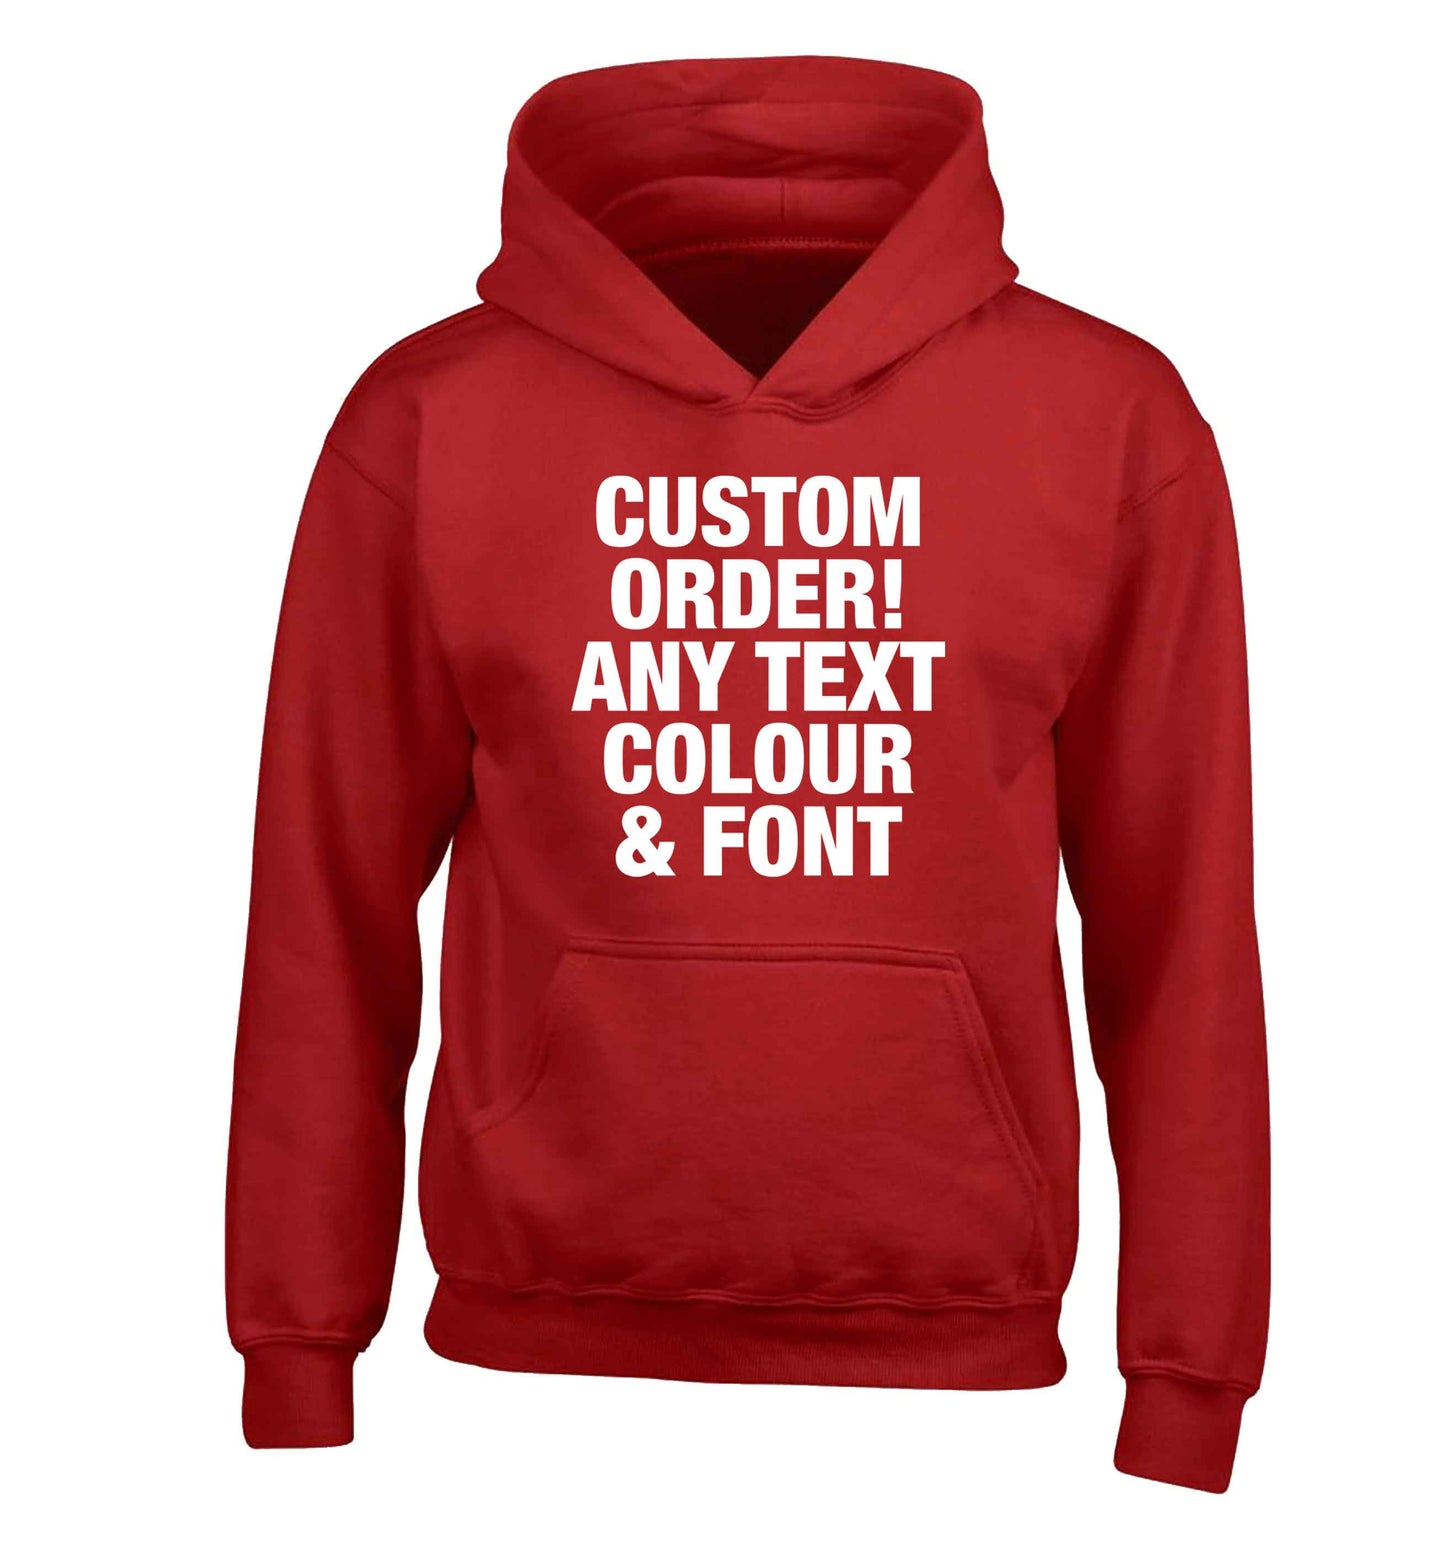 Custom order any text colour and font children's red hoodie 12-13 Years